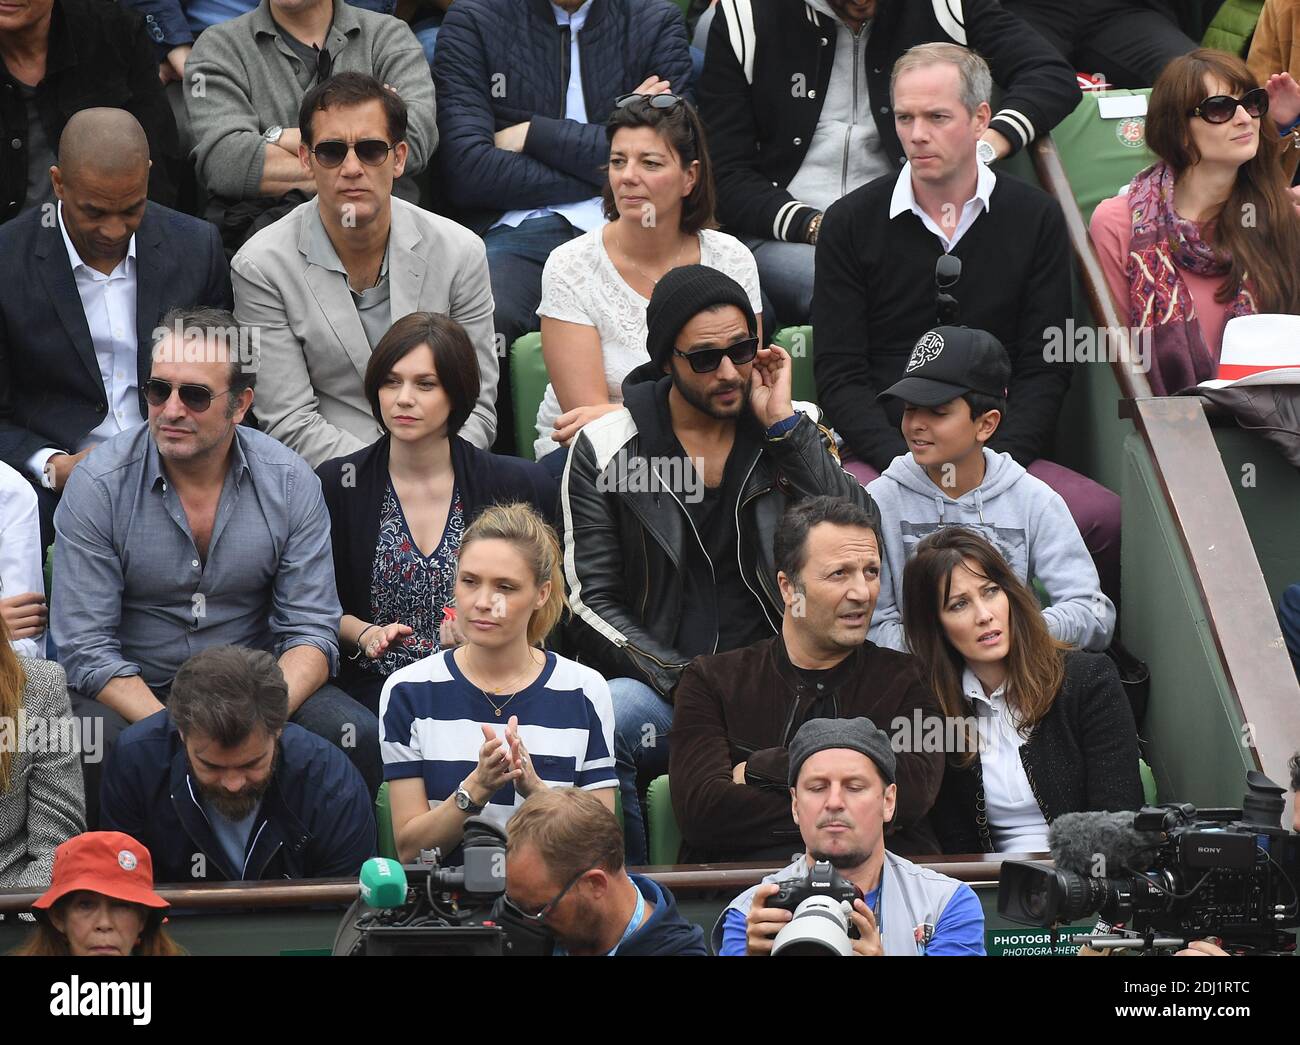 Actor Clive Owen, journalist Julien Arnaud, Jean Dujardin, Nathalie Pechalat, singer Maxime Nucci and son Aaron, Clovis Cornillac and his wife Lilou Fogli, TV Host Arthur Essebag and Mareva Galanter attend Day Fifteen, Men single's Final of the 2016 French Tennis Open at Roland Garros on June 5, 2016 in Paris, France. Photo by Laurent Zabulon/ABACAPRESS.COM Stock Photo